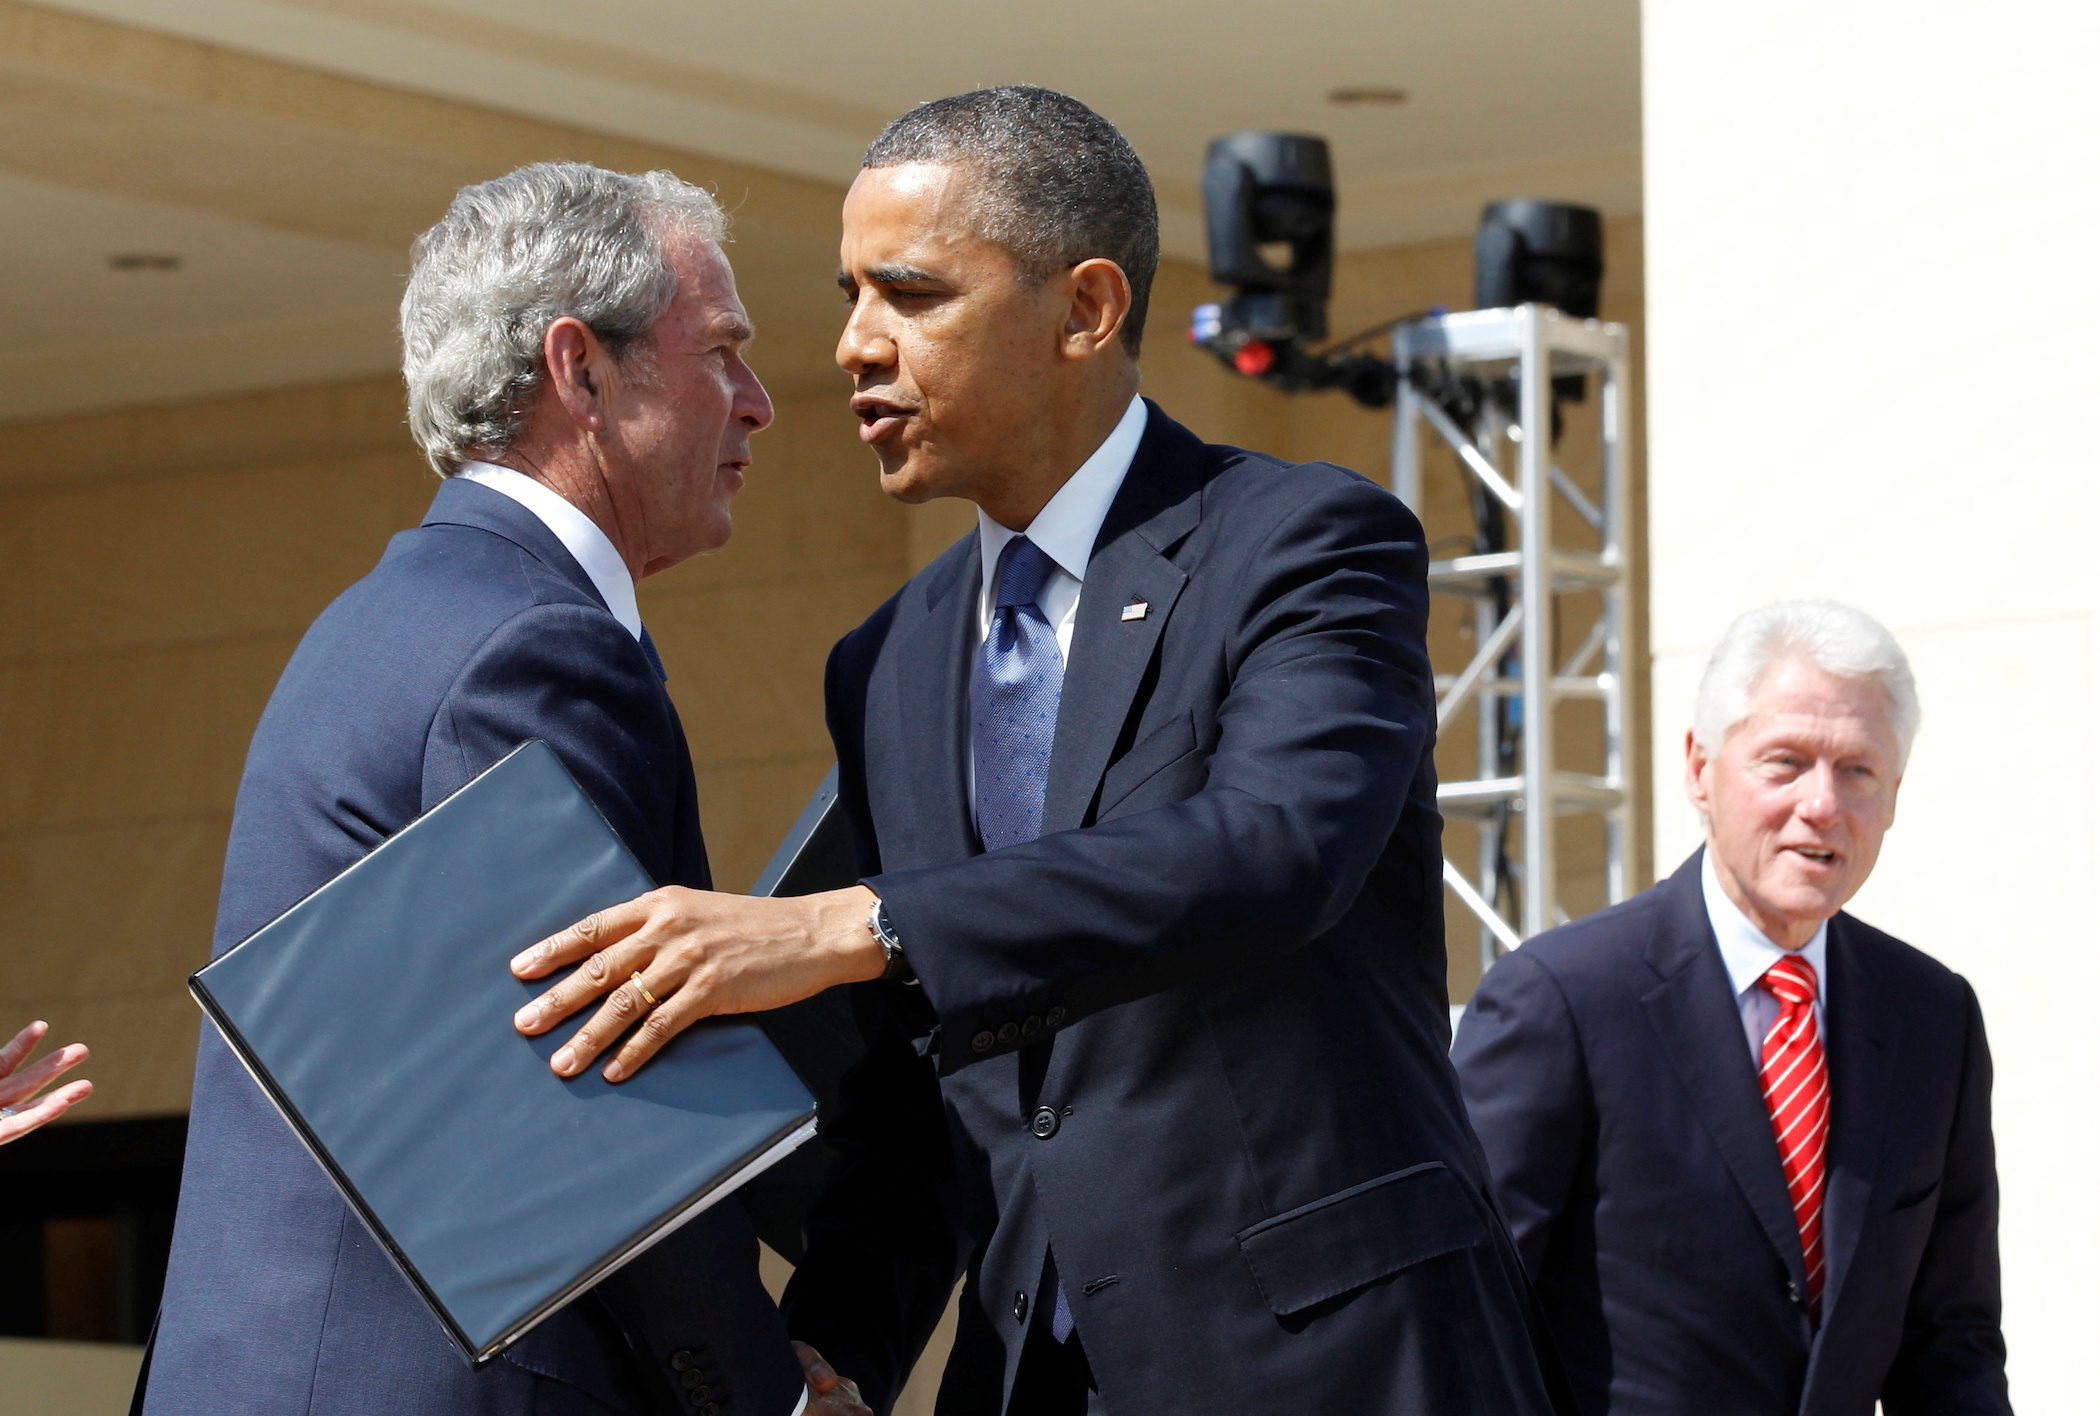 Ex-US presidents Bush, Clinton, Obama band together to aid Afghan refugees